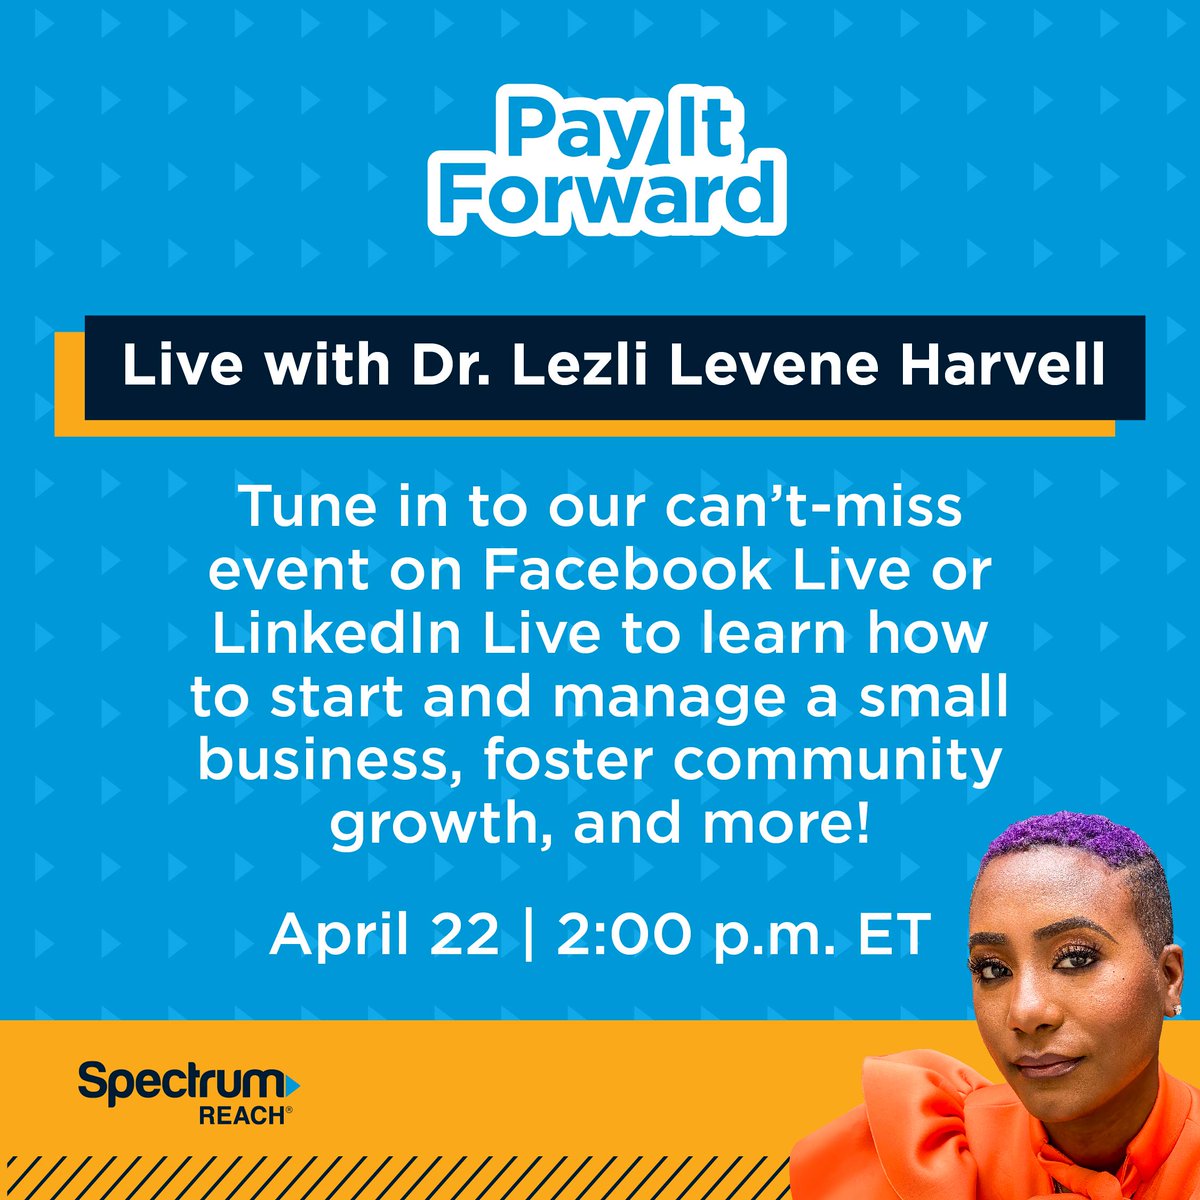 Join Spectrum Reach and Pay it Forward alumna Dr. Lezli Levene Harvell on April 22 for expert tips on starting and managing a small business, fostering community growth, achieving work-life balance, and more. Stream live on Facebook and LinkedIn! fb.me/e/713w2fZ6x